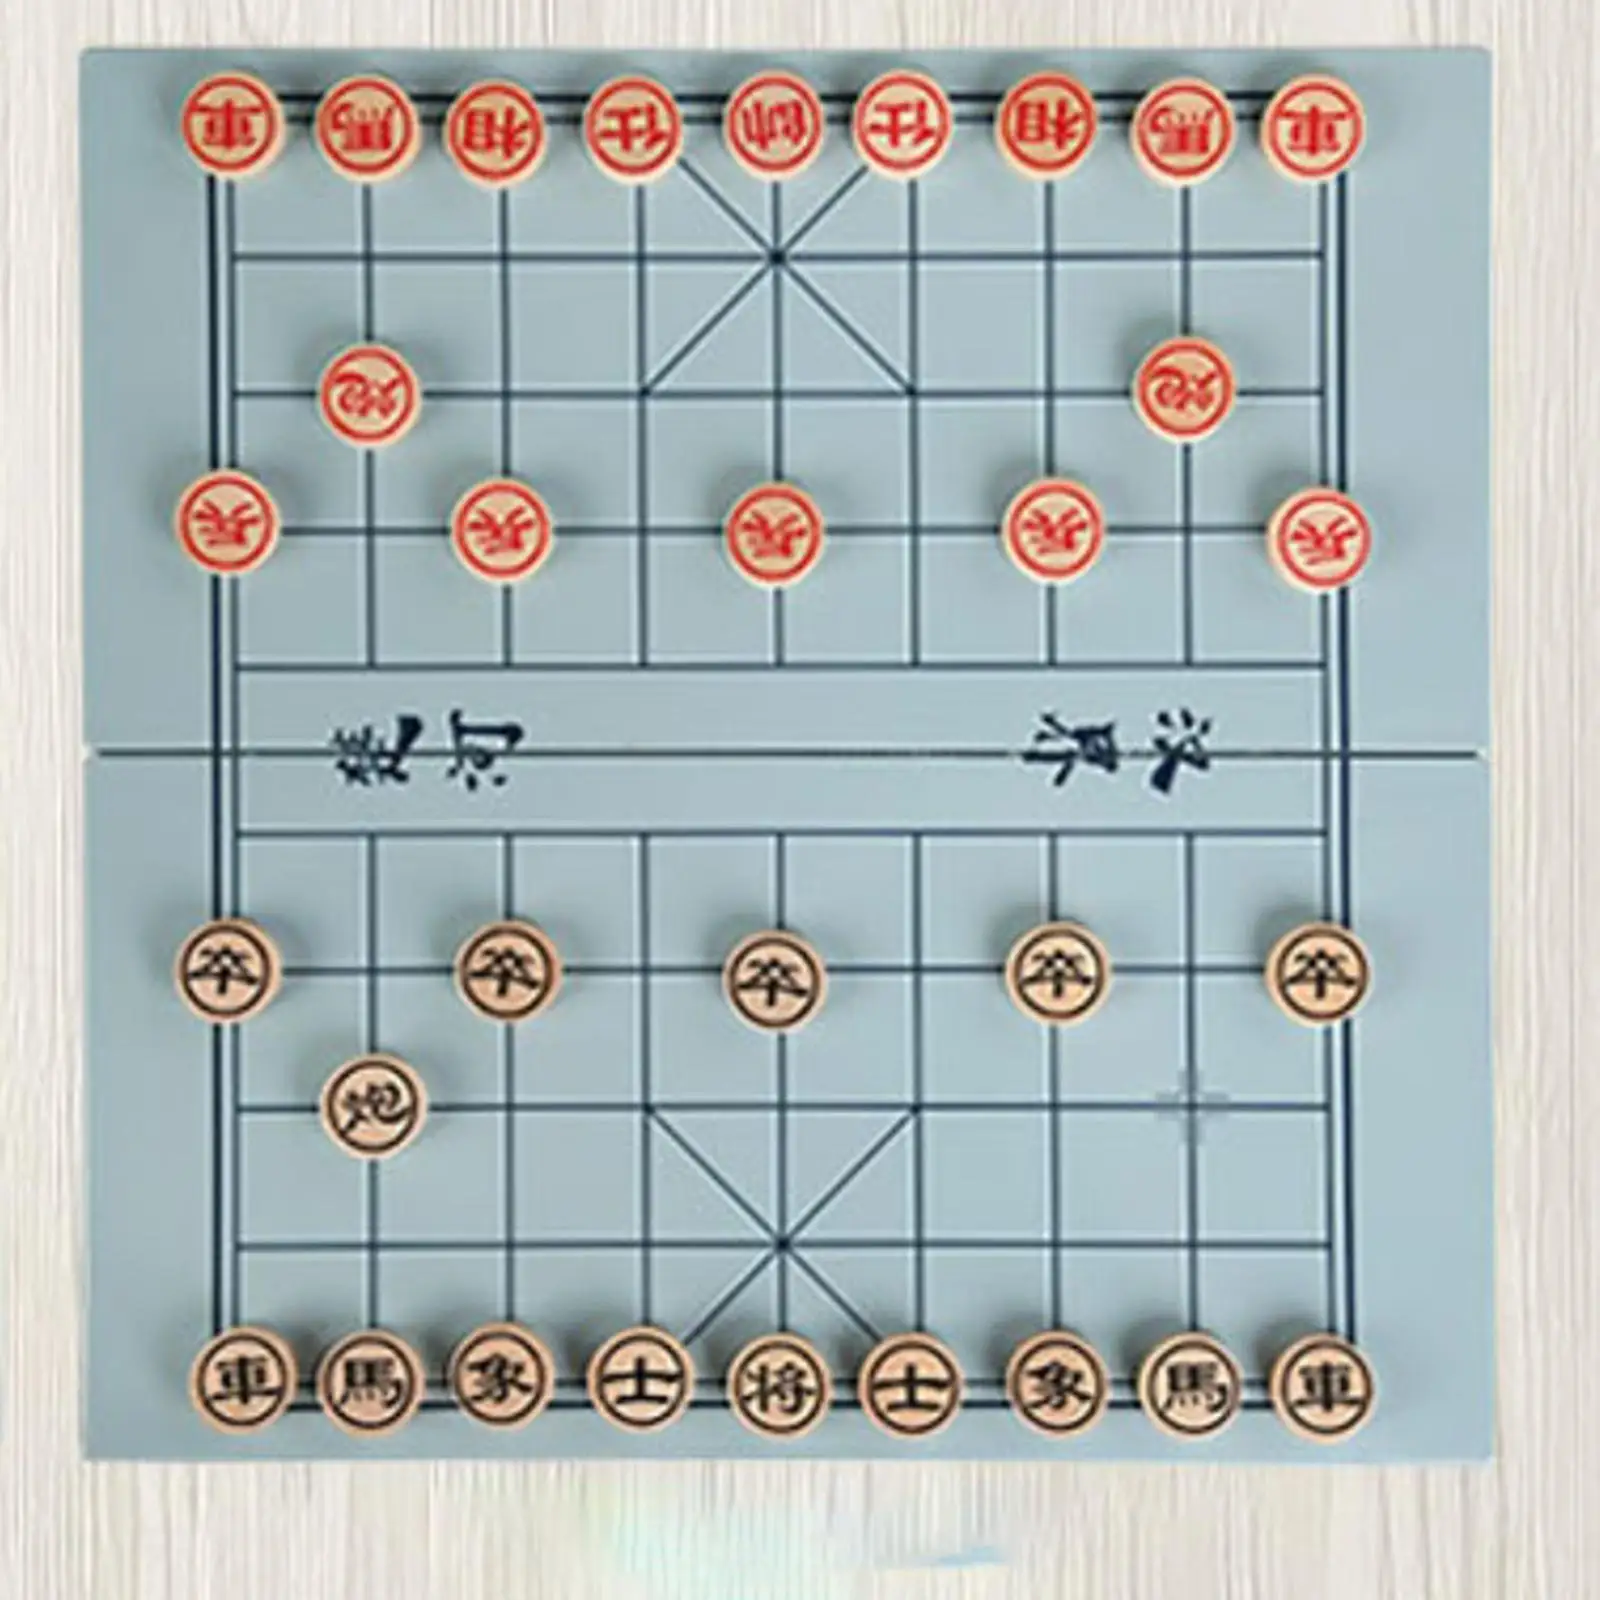 Portable Chinese Chess Set,Entertainment Board Game,Funny Folding China Chess,Xiangqi game for Adults